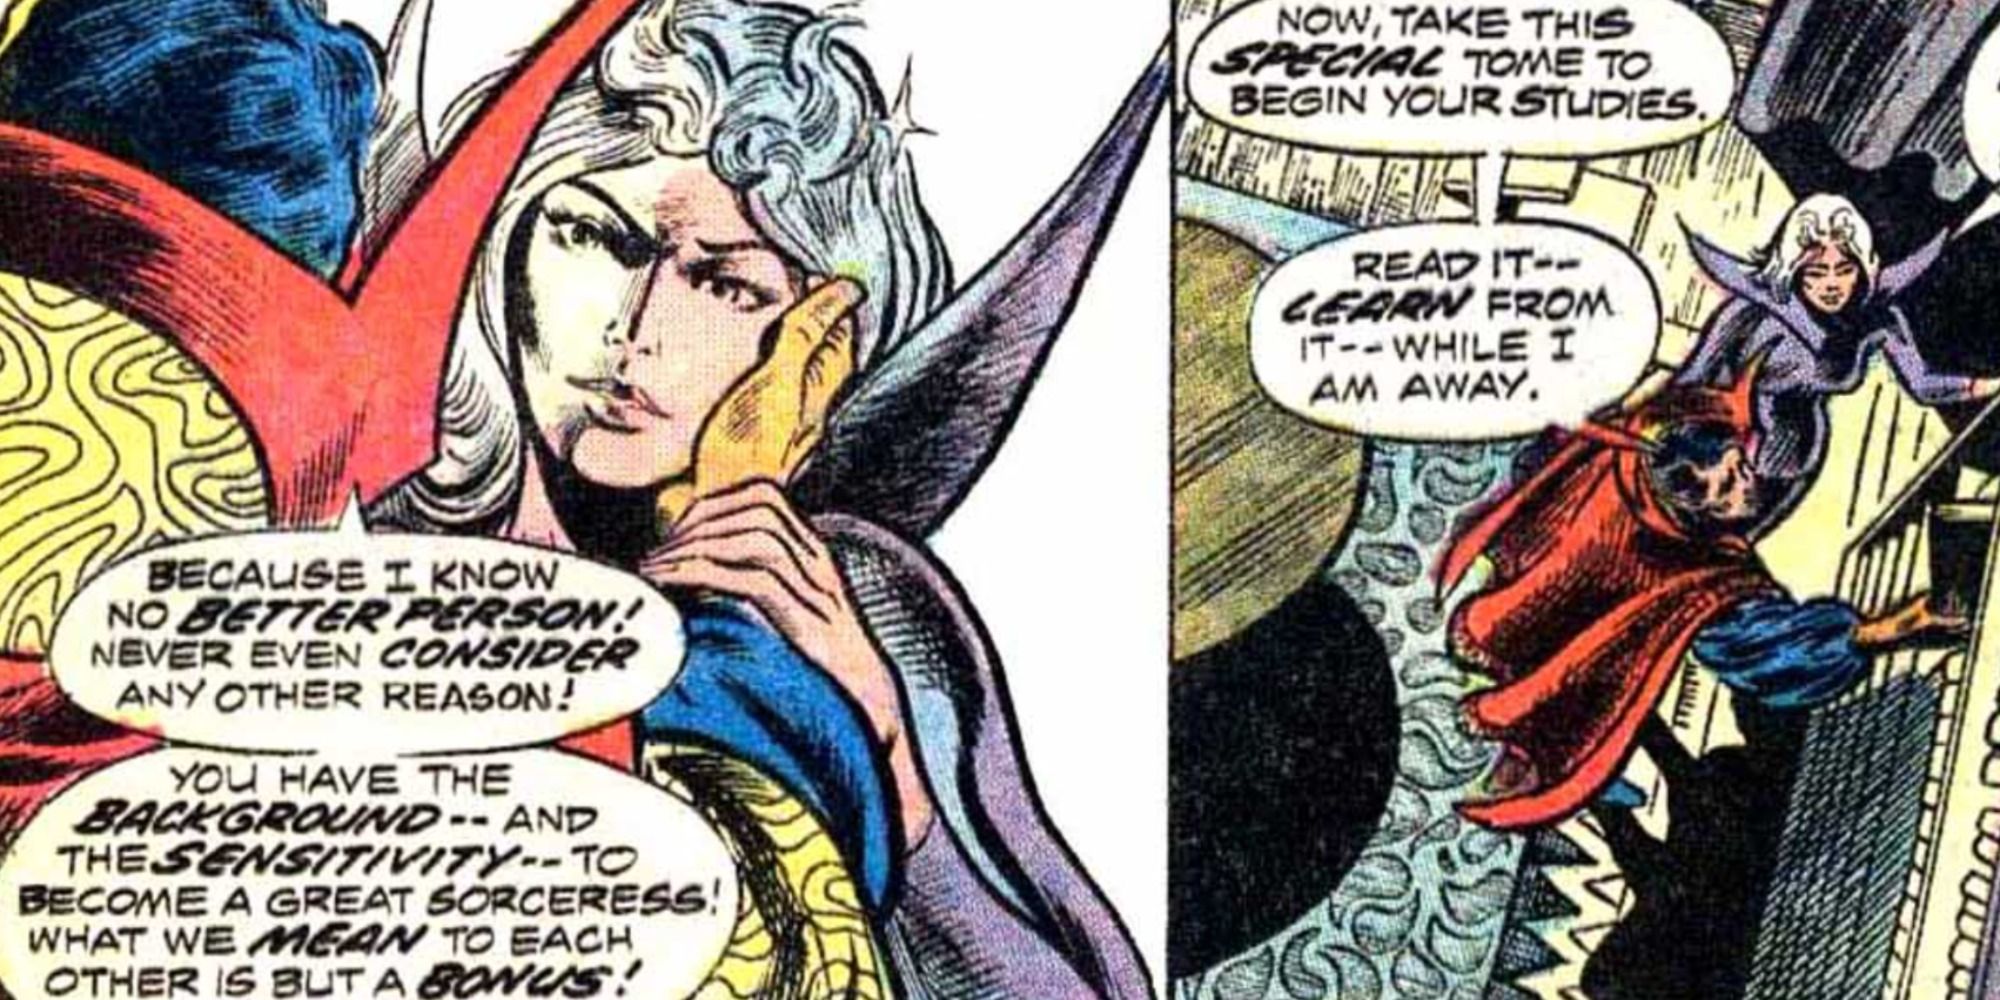 Clea trains with Doctor Strange in Marvel Comics.